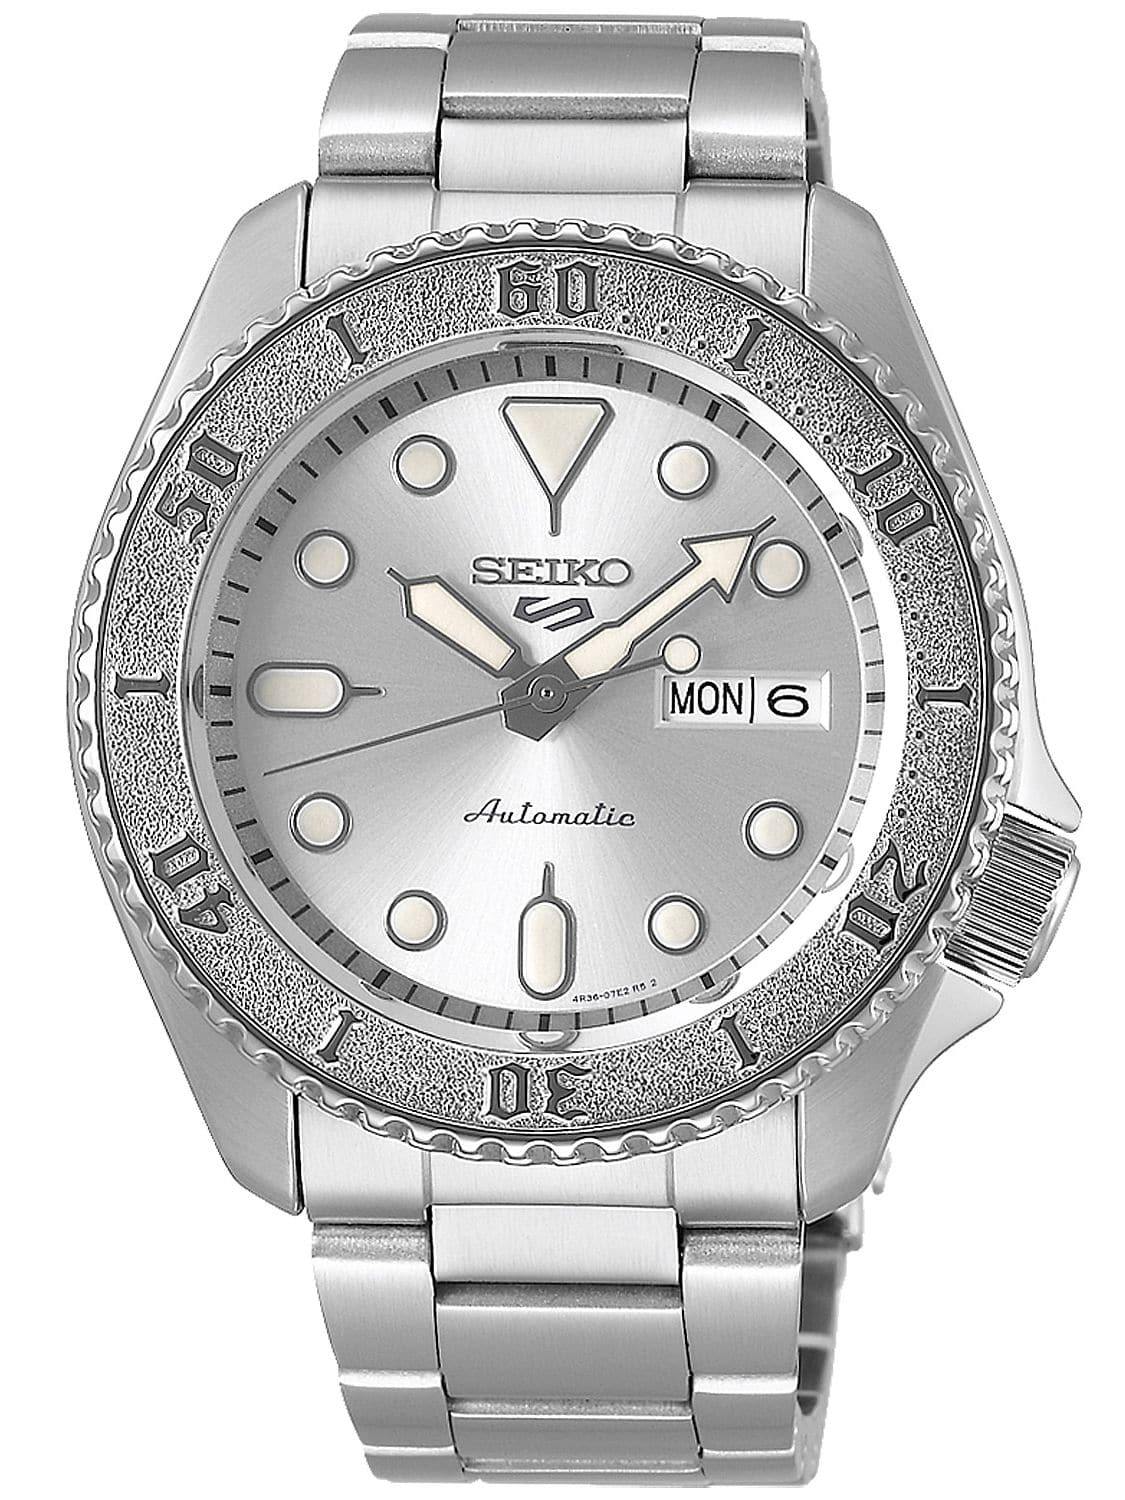 NEW Seiko 5 Sports 100M Automatic Men's Watch All Stainless Steel SRPE71K1 - Diligence1International